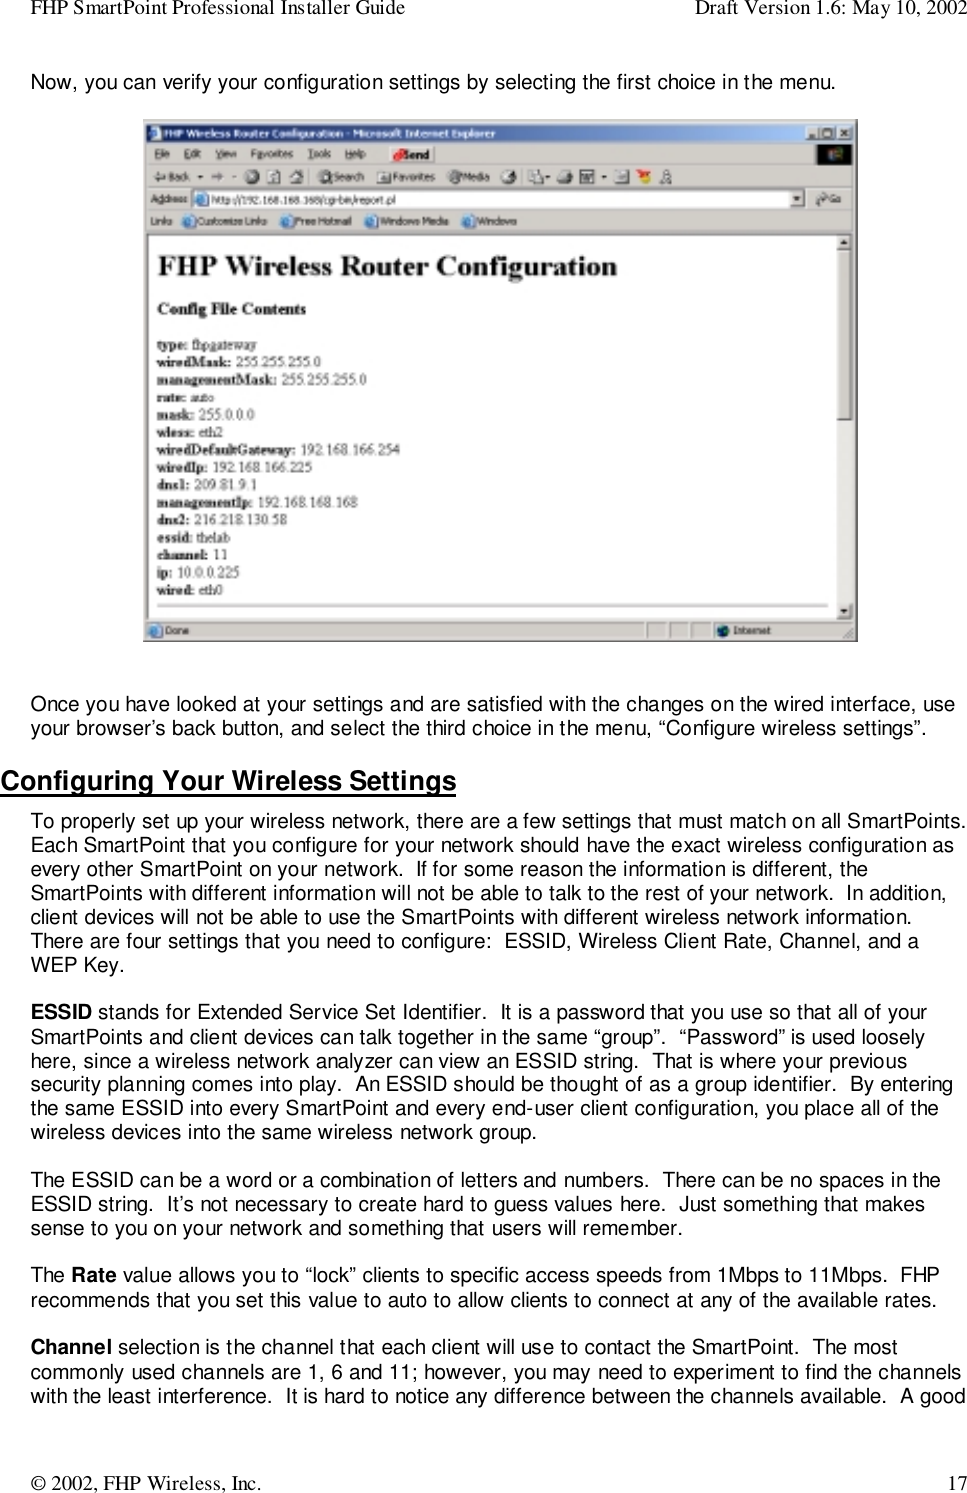 FHP SmartPoint Professional Installer Guide Draft Version 1.6: May 10, 2002© 2002, FHP Wireless, Inc. 17Now, you can verify your configuration settings by selecting the first choice in the menu.Once you have looked at your settings and are satisfied with the changes on the wired interface, useyour browser’s back button, and select the third choice in the menu, “Configure wireless settings”.Configuring Your Wireless SettingsTo properly set up your wireless network, there are a few settings that must match on all SmartPoints.Each SmartPoint that you configure for your network should have the exact wireless configuration asevery other SmartPoint on your network.  If for some reason the information is different, theSmartPoints with different information will not be able to talk to the rest of your network.  In addition,client devices will not be able to use the SmartPoints with different wireless network information.There are four settings that you need to configure:  ESSID, Wireless Client Rate, Channel, and aWEP Key.ESSID stands for Extended Service Set Identifier.  It is a password that you use so that all of yourSmartPoints and client devices can talk together in the same “group”.  “Password” is used looselyhere, since a wireless network analyzer can view an ESSID string.  That is where your previoussecurity planning comes into play.  An ESSID should be thought of as a group identifier.  By enteringthe same ESSID into every SmartPoint and every end-user client configuration, you place all of thewireless devices into the same wireless network group.The ESSID can be a word or a combination of letters and numbers.  There can be no spaces in theESSID string.  It’s not necessary to create hard to guess values here.  Just something that makessense to you on your network and something that users will remember.The Rate value allows you to “lock” clients to specific access speeds from 1Mbps to 11Mbps.  FHPrecommends that you set this value to auto to allow clients to connect at any of the available rates.Channel selection is the channel that each client will use to contact the SmartPoint.  The mostcommonly used channels are 1, 6 and 11; however, you may need to experiment to find the channelswith the least interference.  It is hard to notice any difference between the channels available.  A good